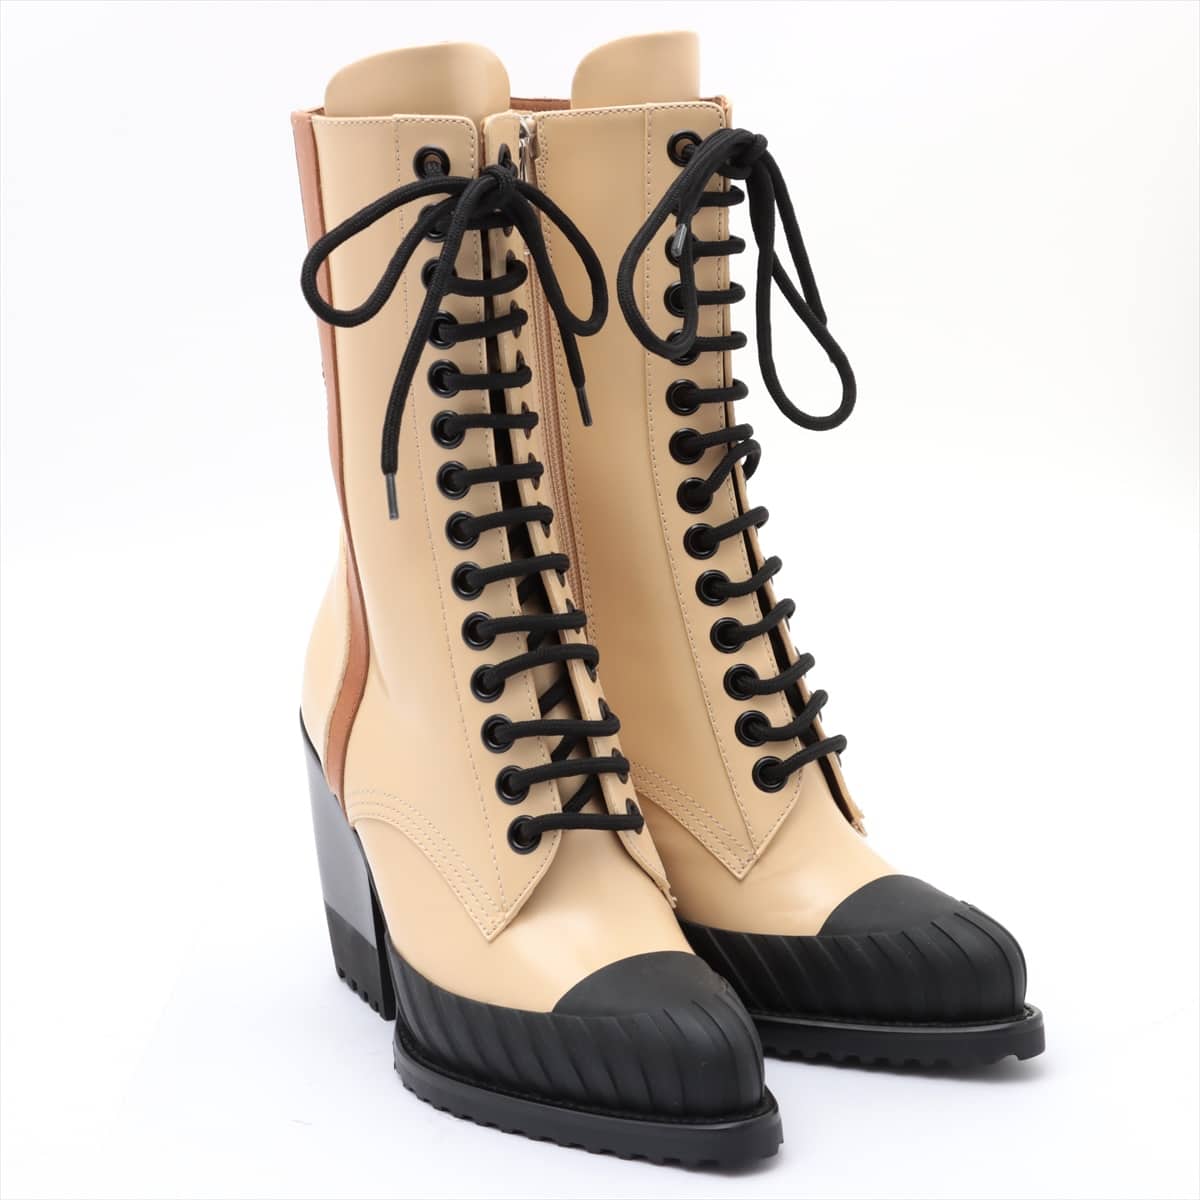 Chloe Leather Boots 37 Ladies' Yellow